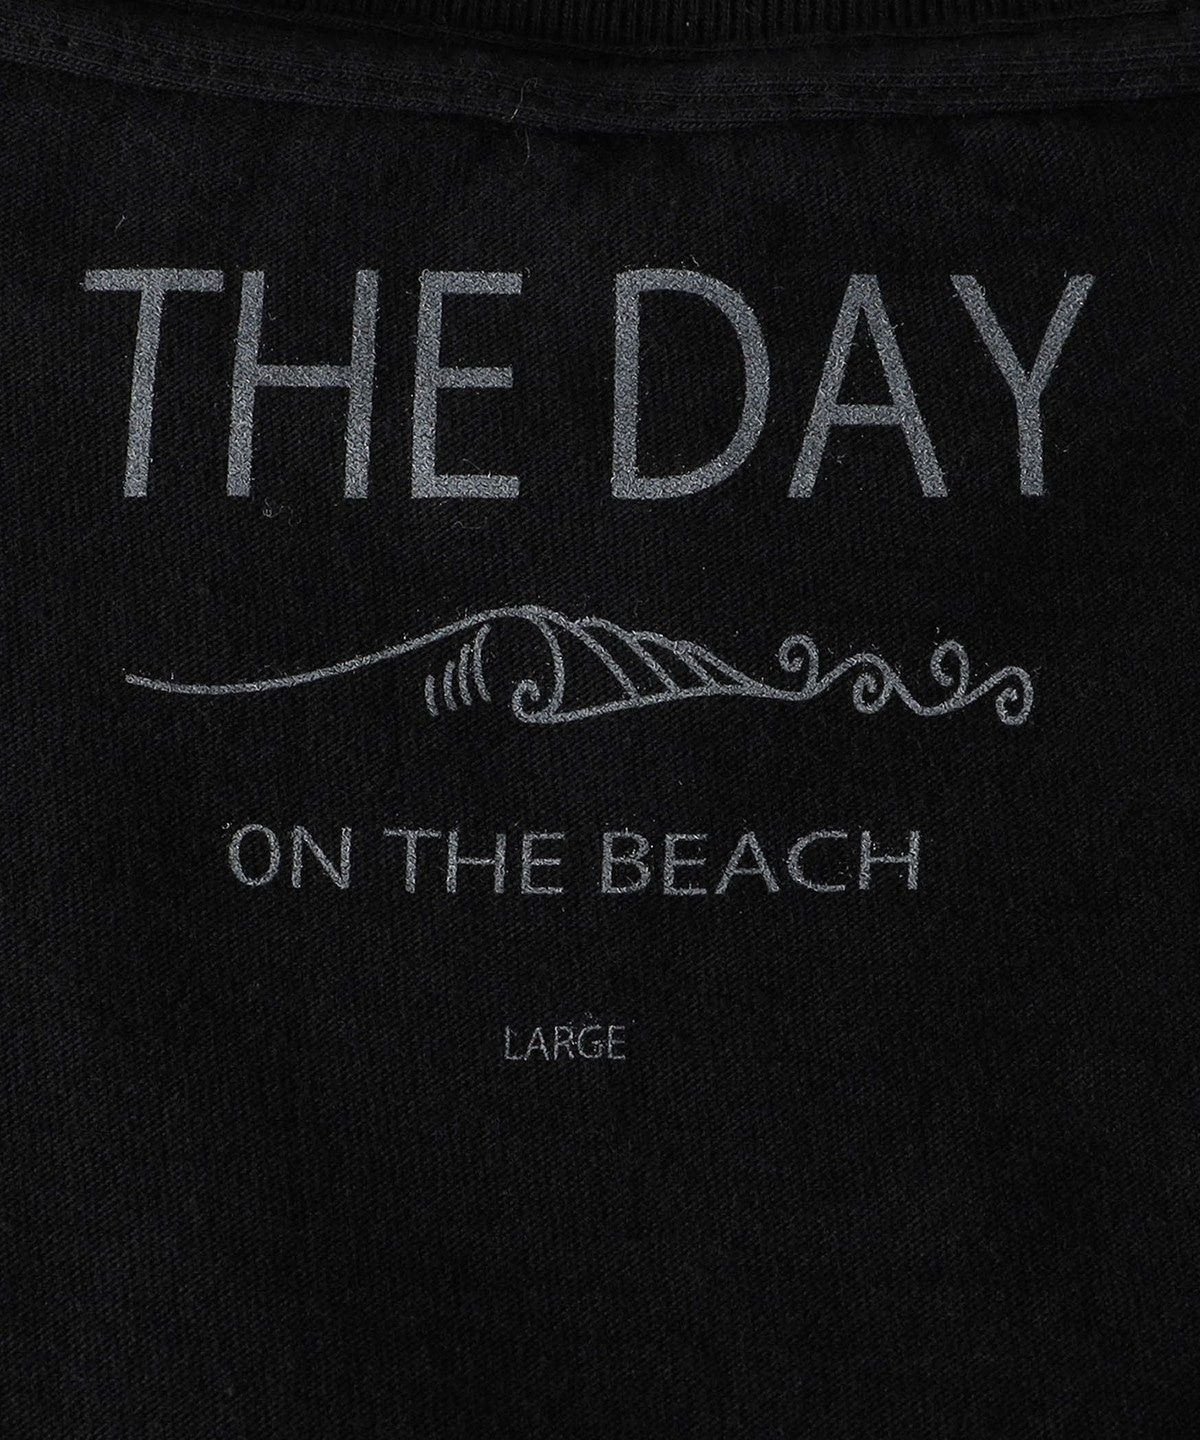 THE DAY ON THE BEACH